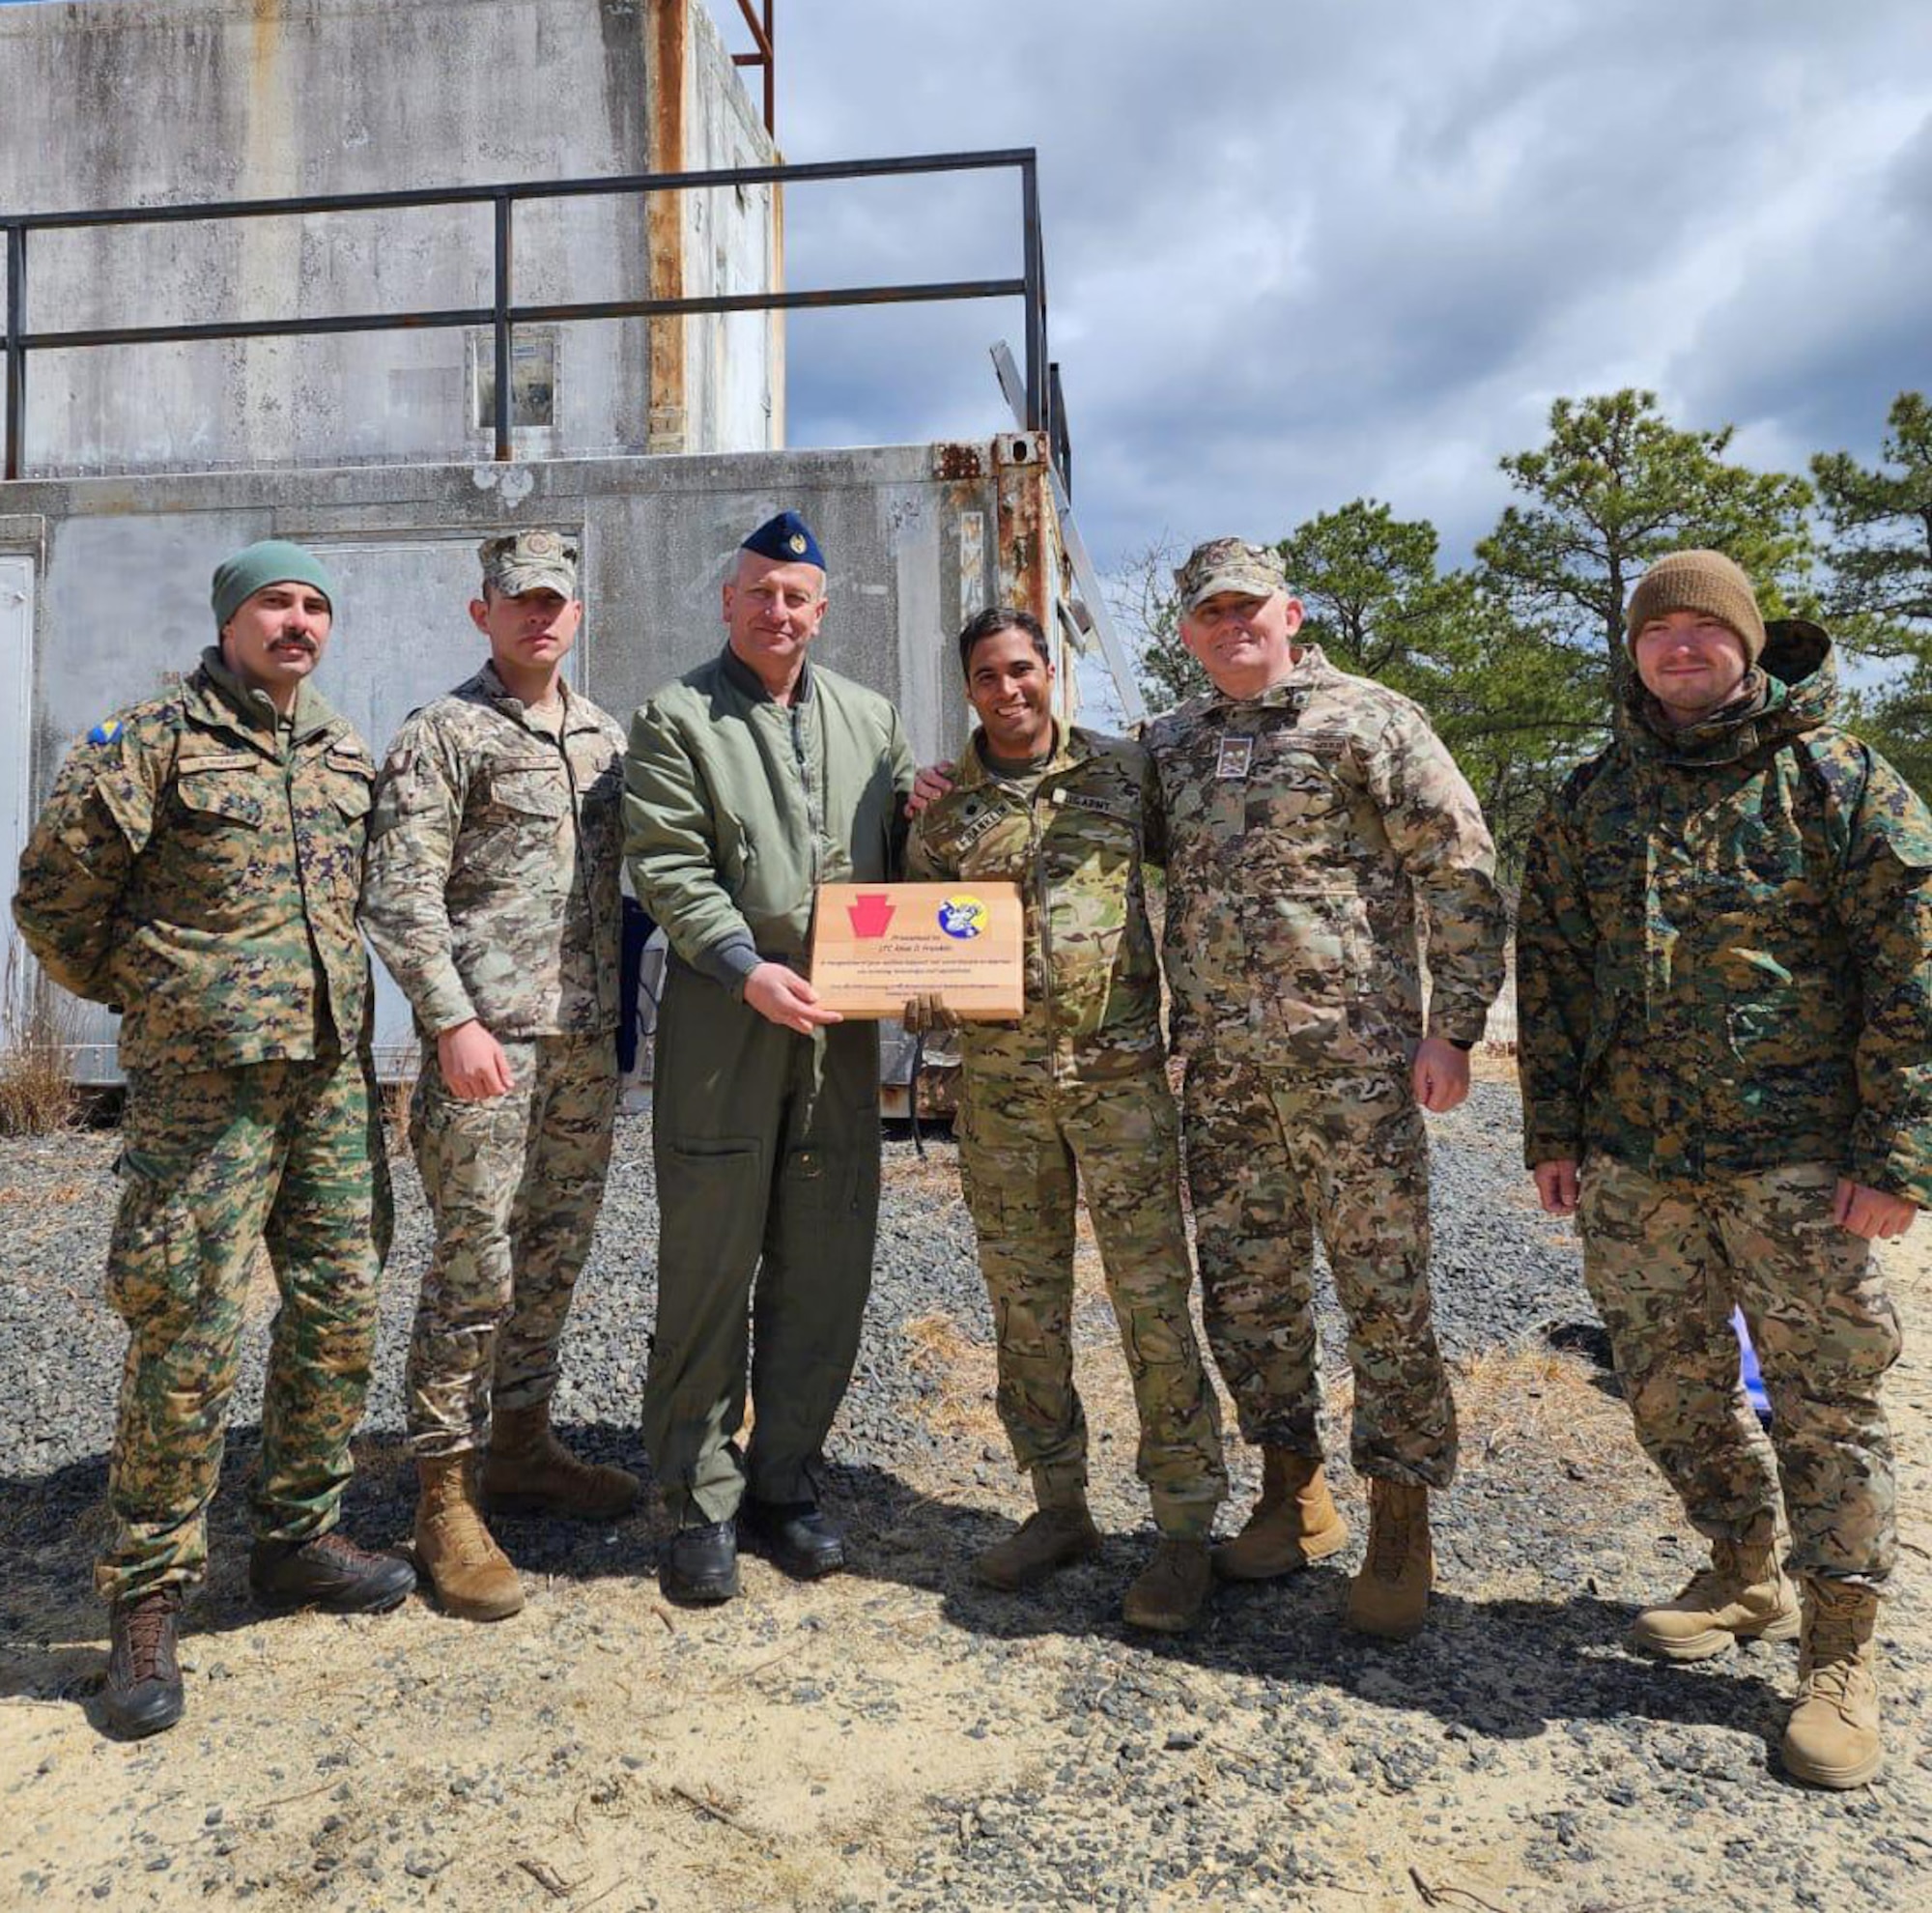 Members of the Armed Forces of Bosnia and Herzegovina and Maryland National Guard pose for a group photo during Deliberate Response '24 at Warren Grove Range, NJ, April 6, 2024.